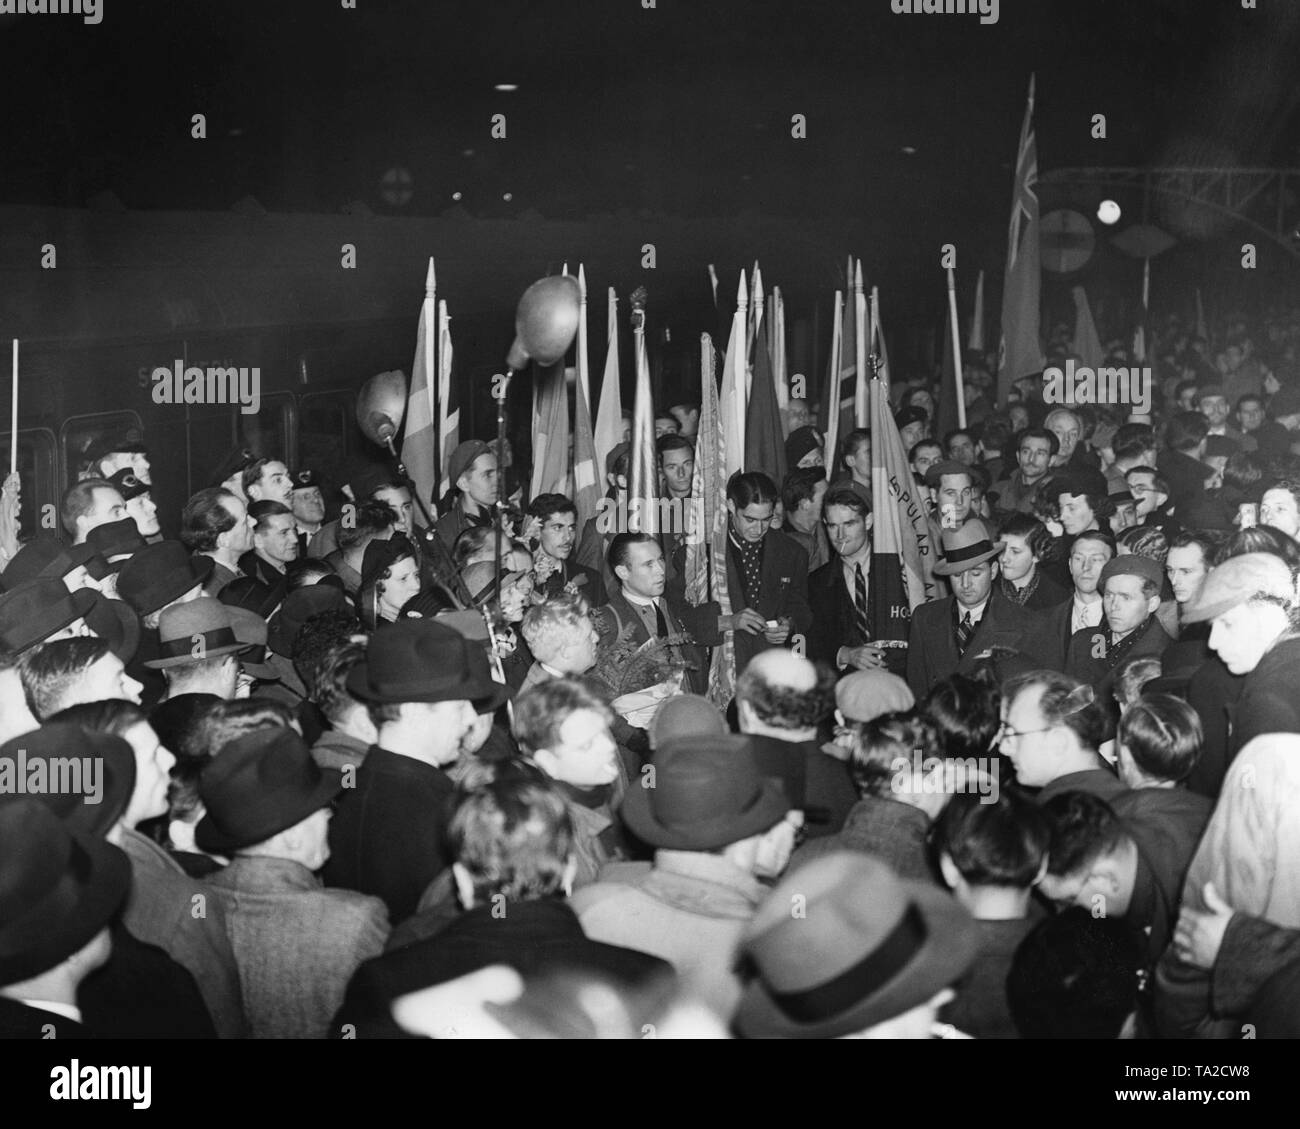 Photo of voluntary Republican Spanish fighters on their return from the Spanish Civil War at Victoria Station in London on December 7, 1938. The 400 fighters of the International Brigades were received at the station by a crowd and socialist officials. Stock Photo